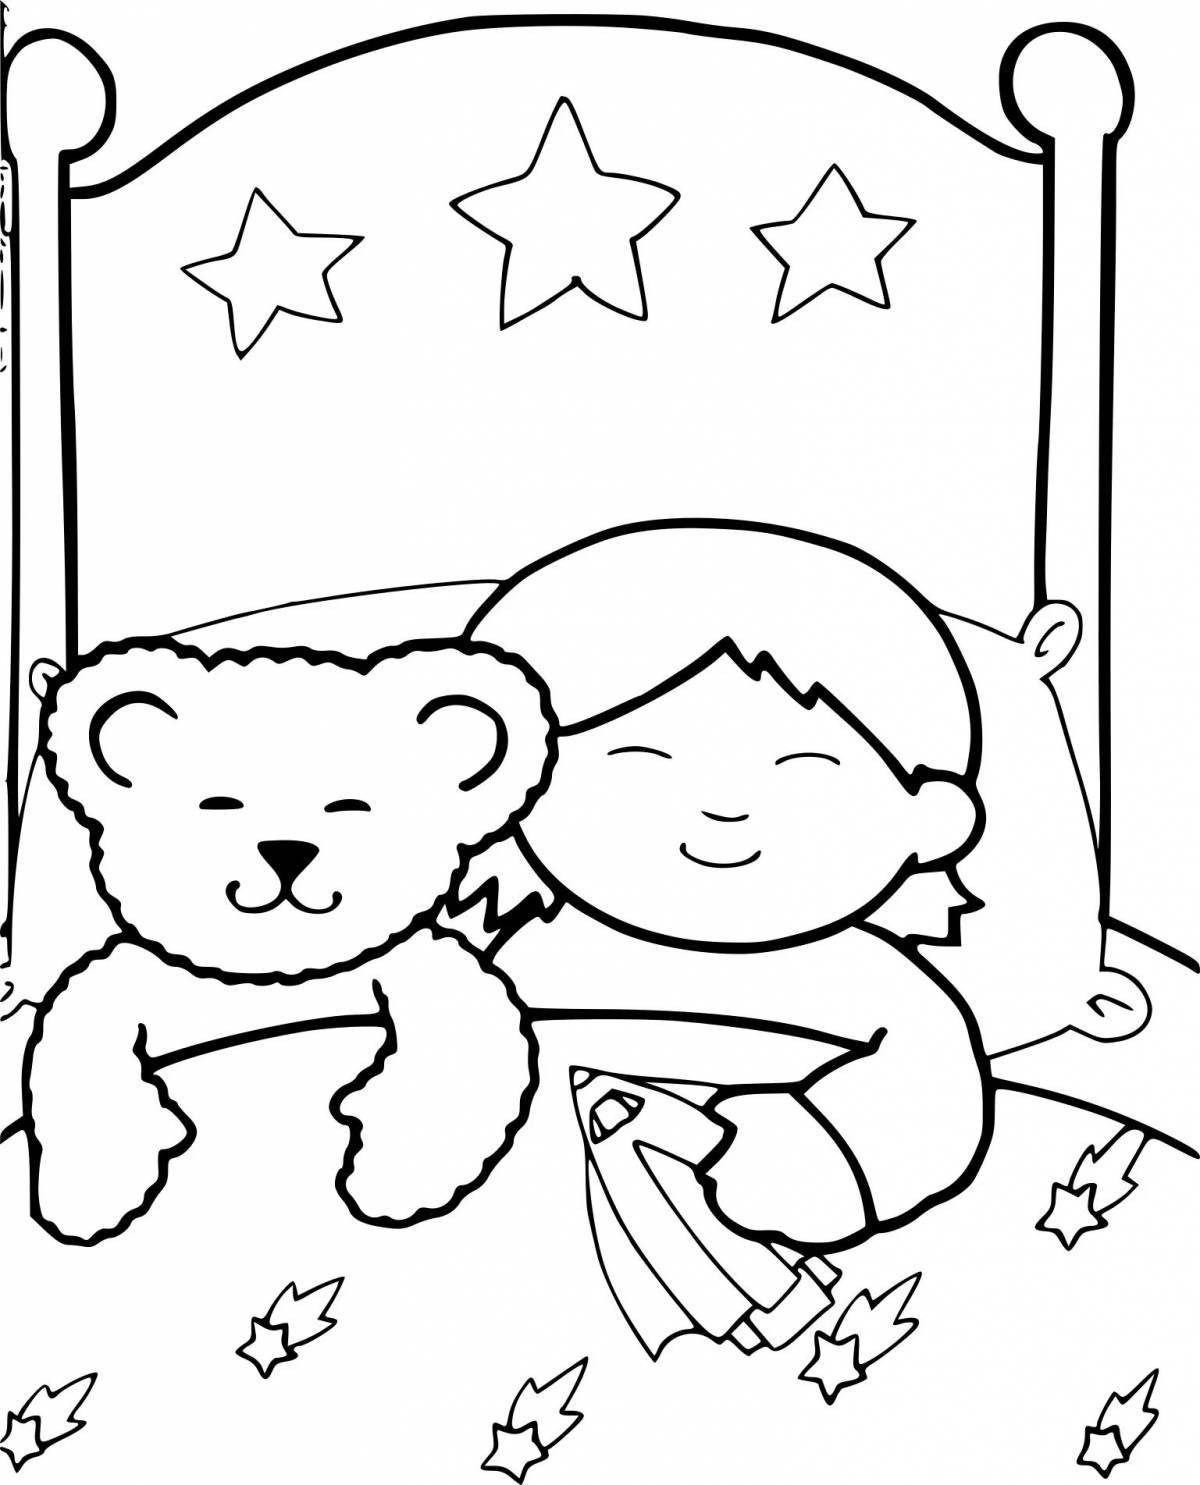 Idyllic children's coloring pages